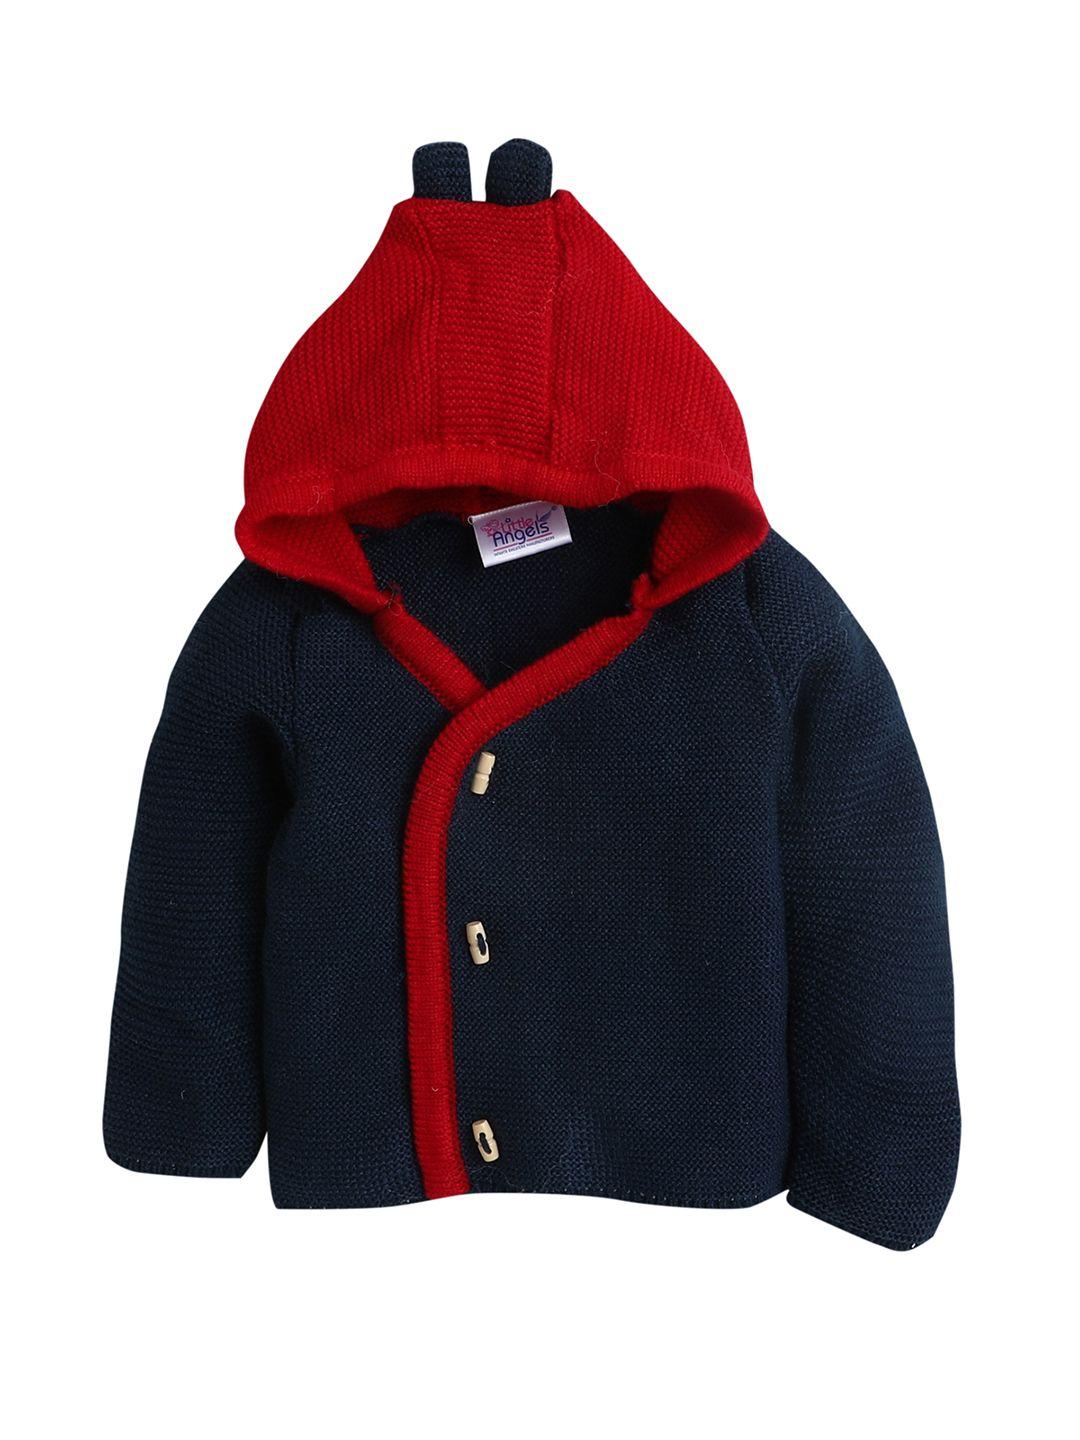 little-angels-kids-navy-blue-&-red-colourblocked-hooded-cardigan-sweater